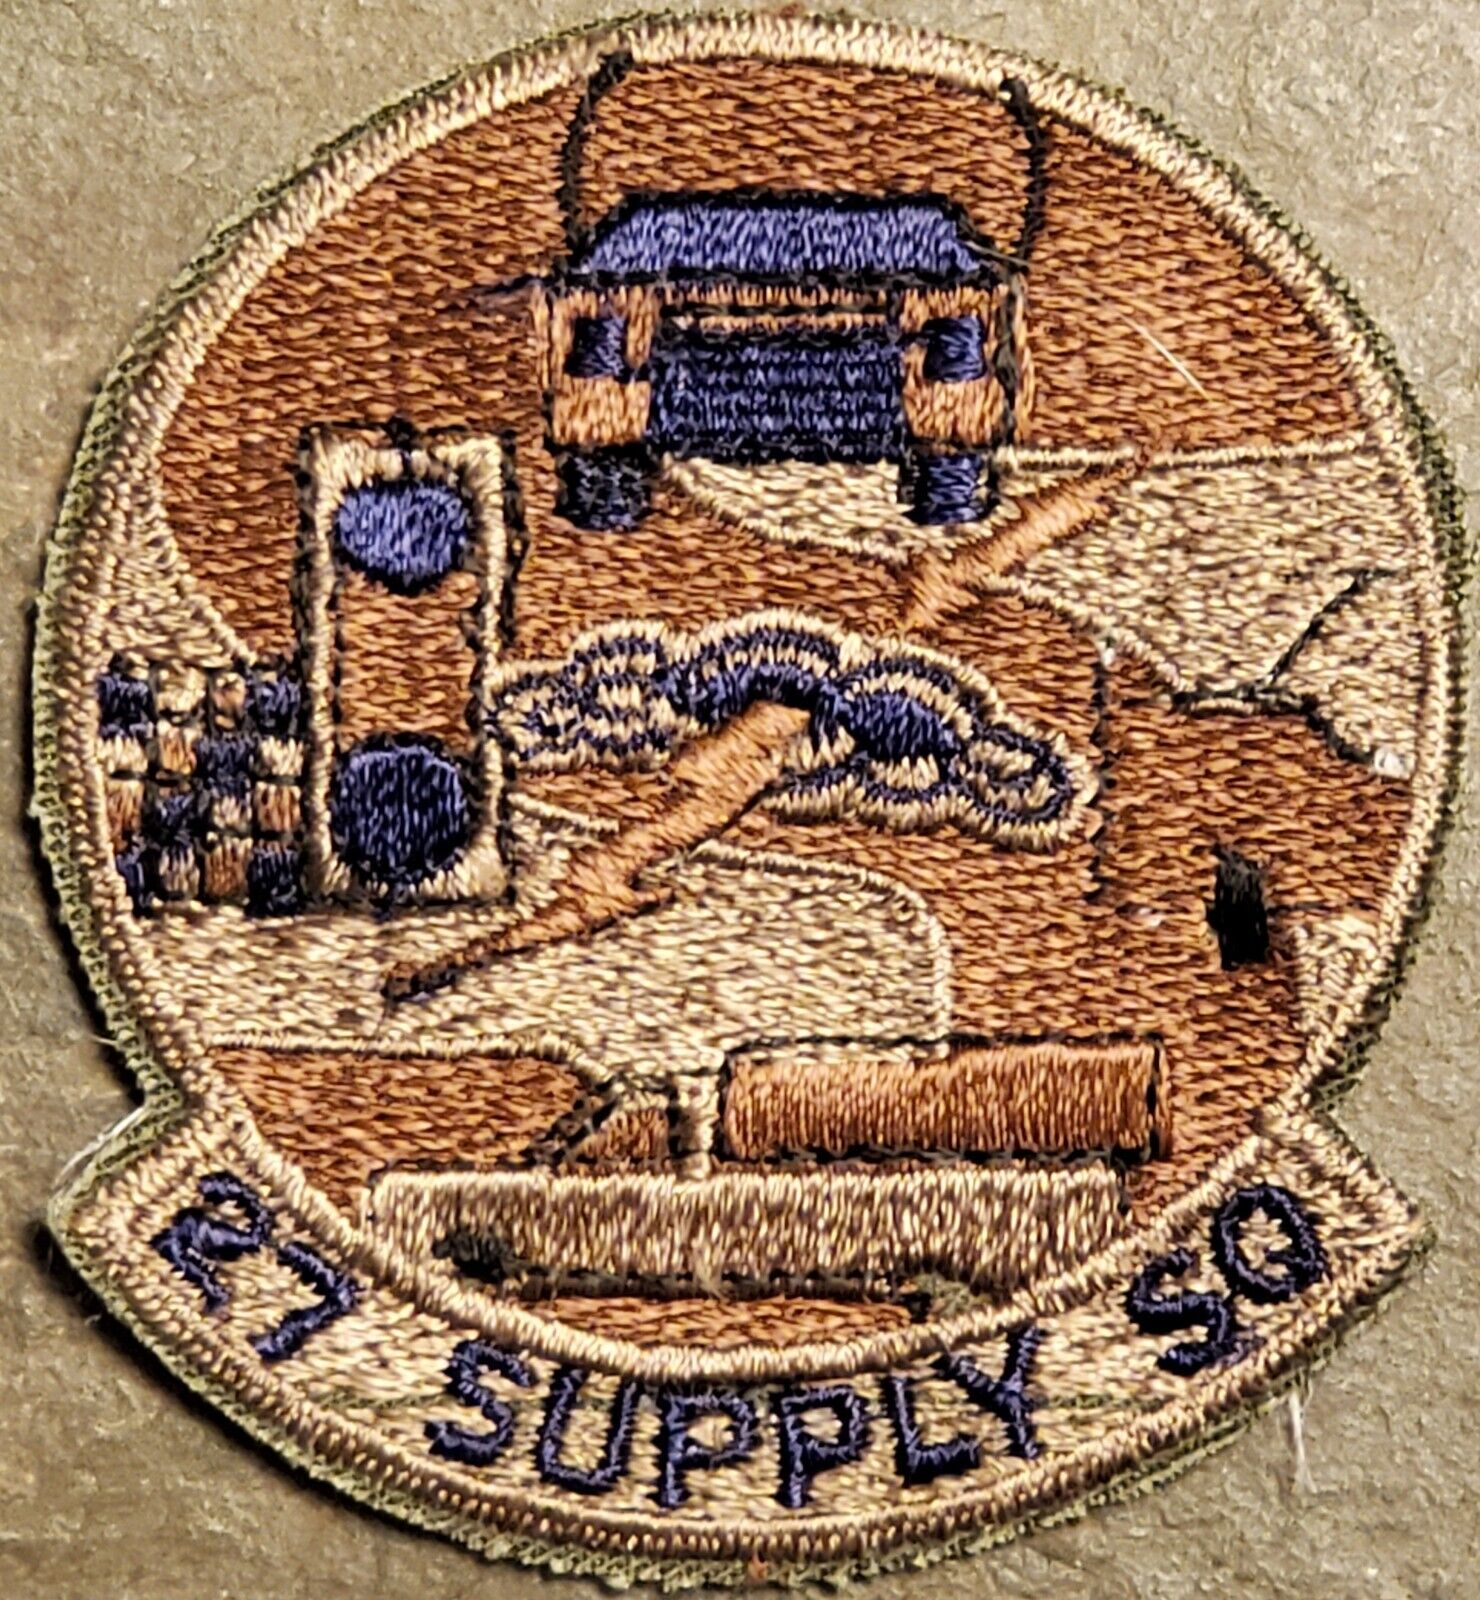 USAF MILITARY PATCH AIR FORCE 27th SUPPLY SQUADRON SUBDUED DESERT DCU ORG USGI